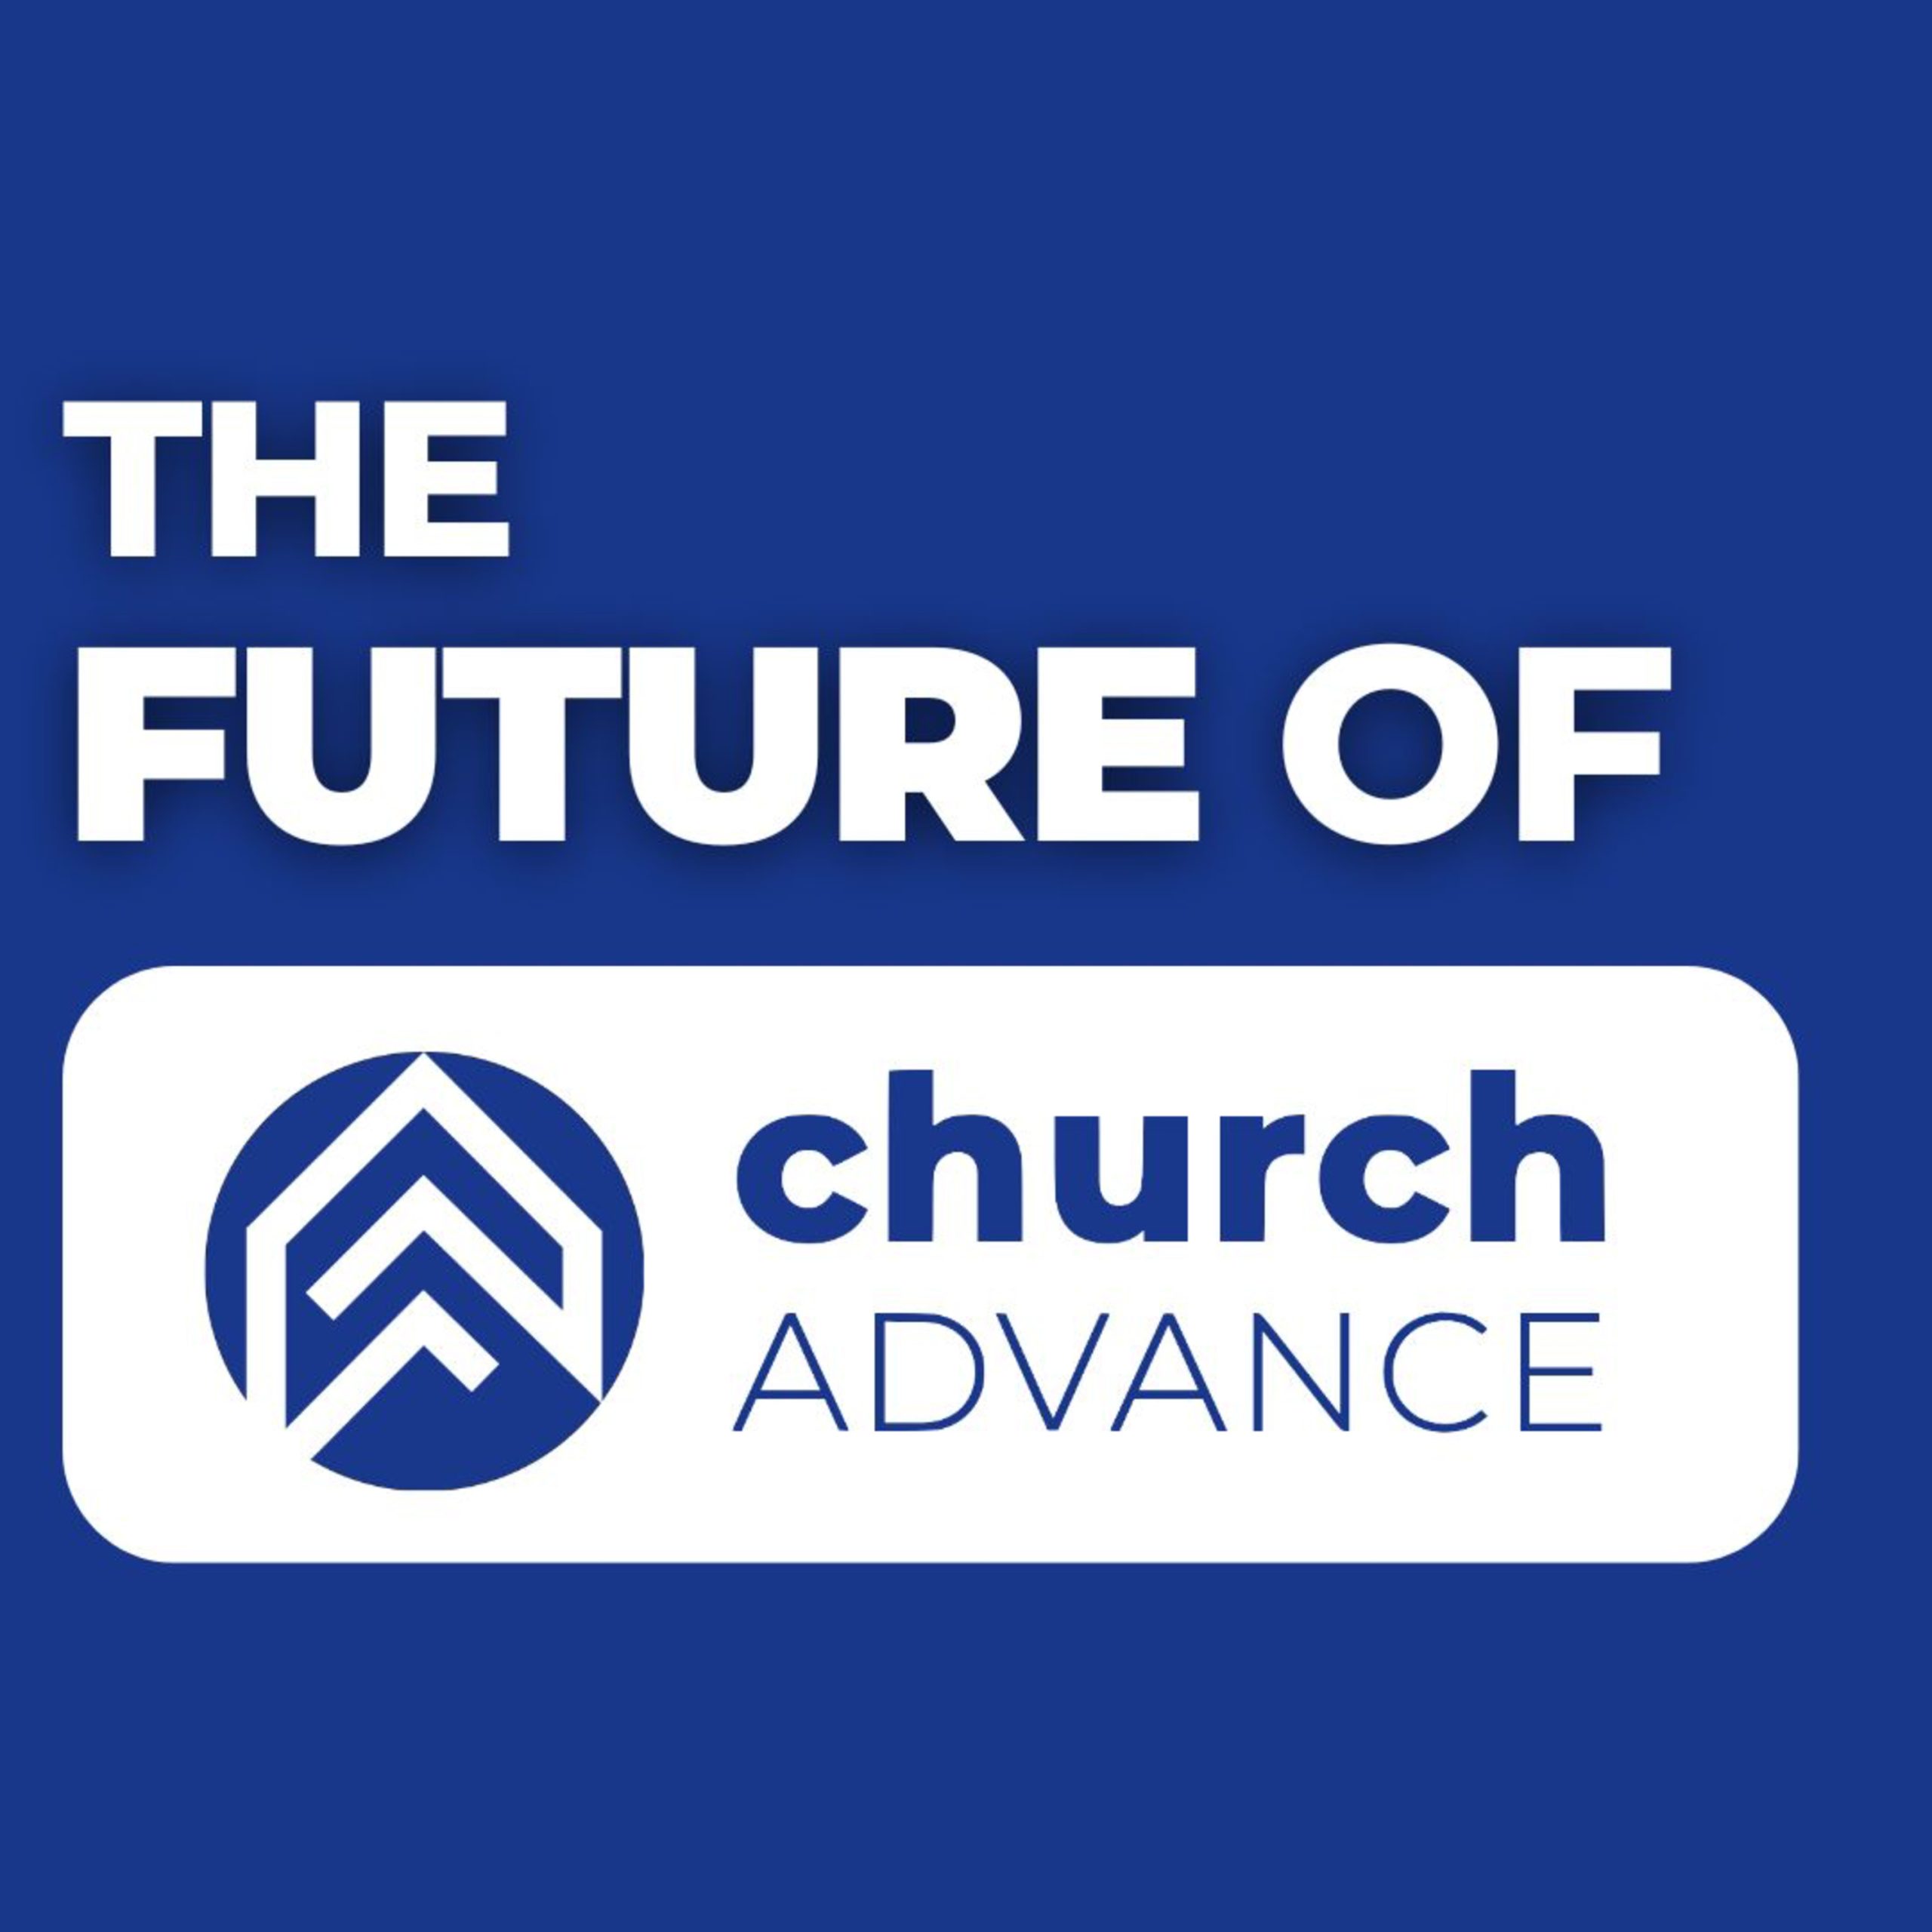 What’s Next for Church Advance?